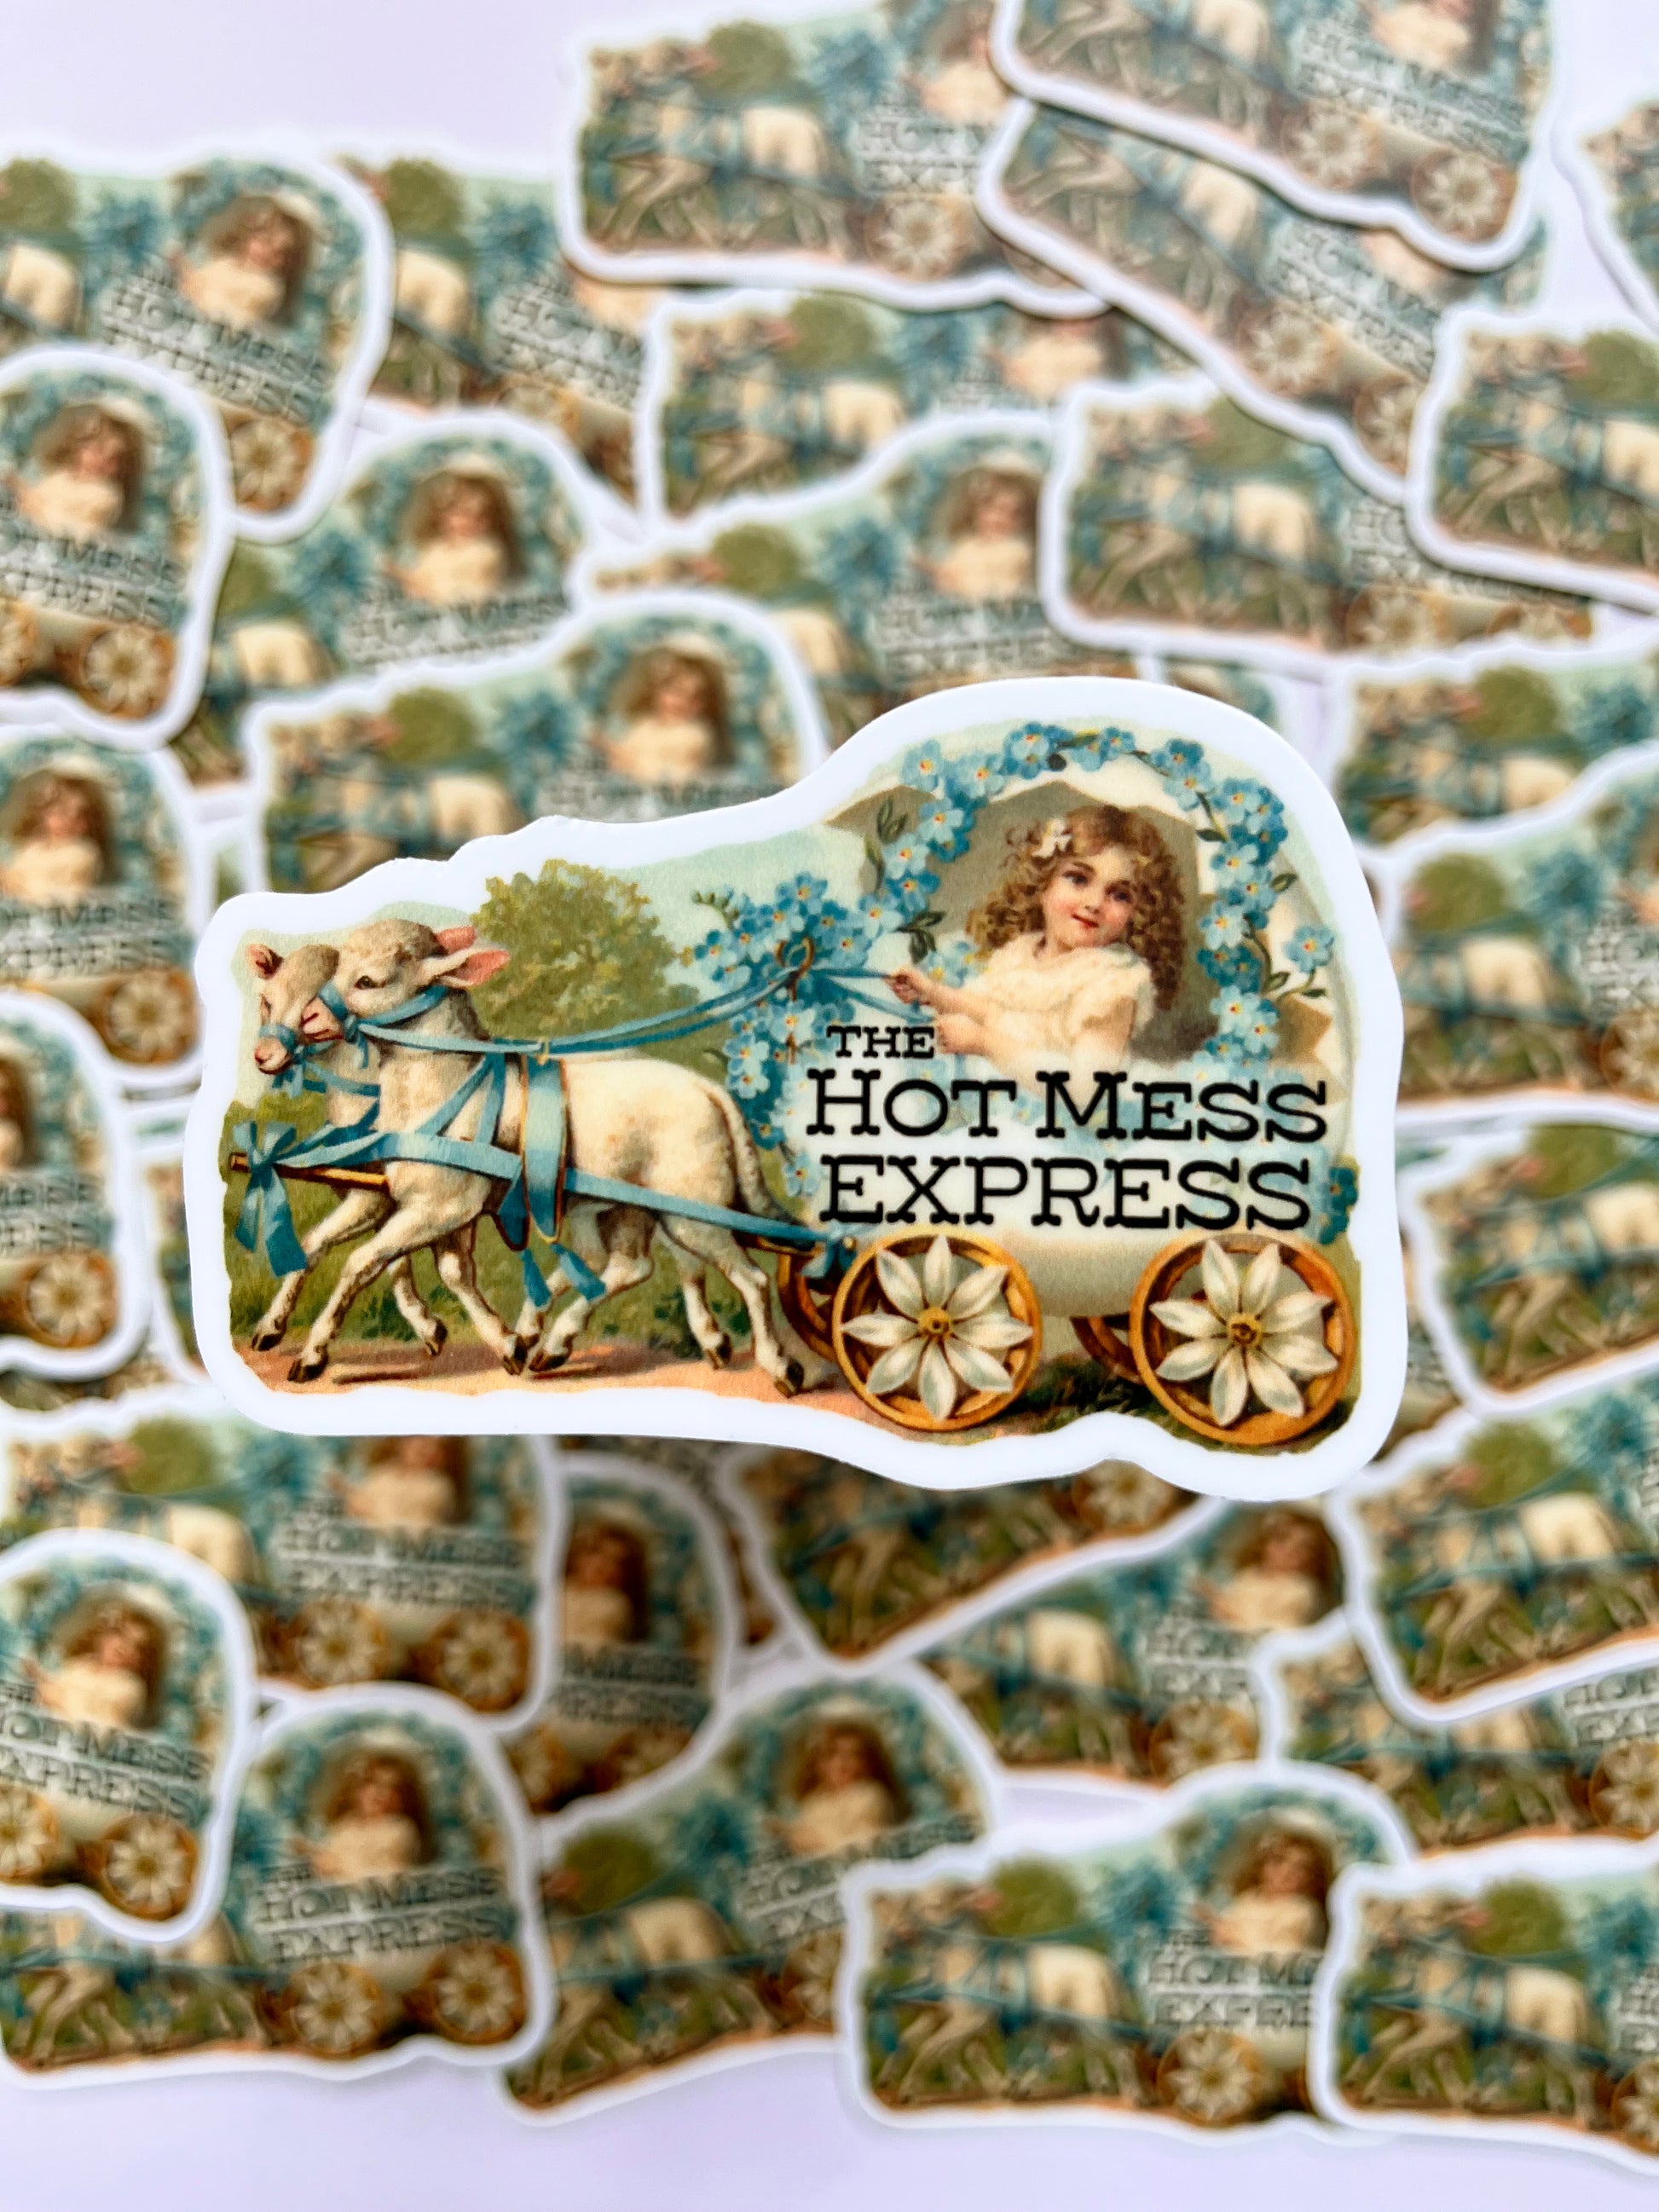 funny vintage sticker the hot mess express girl riding in carriage with lambs floral blue green pretty funny stickers coin laundry montana